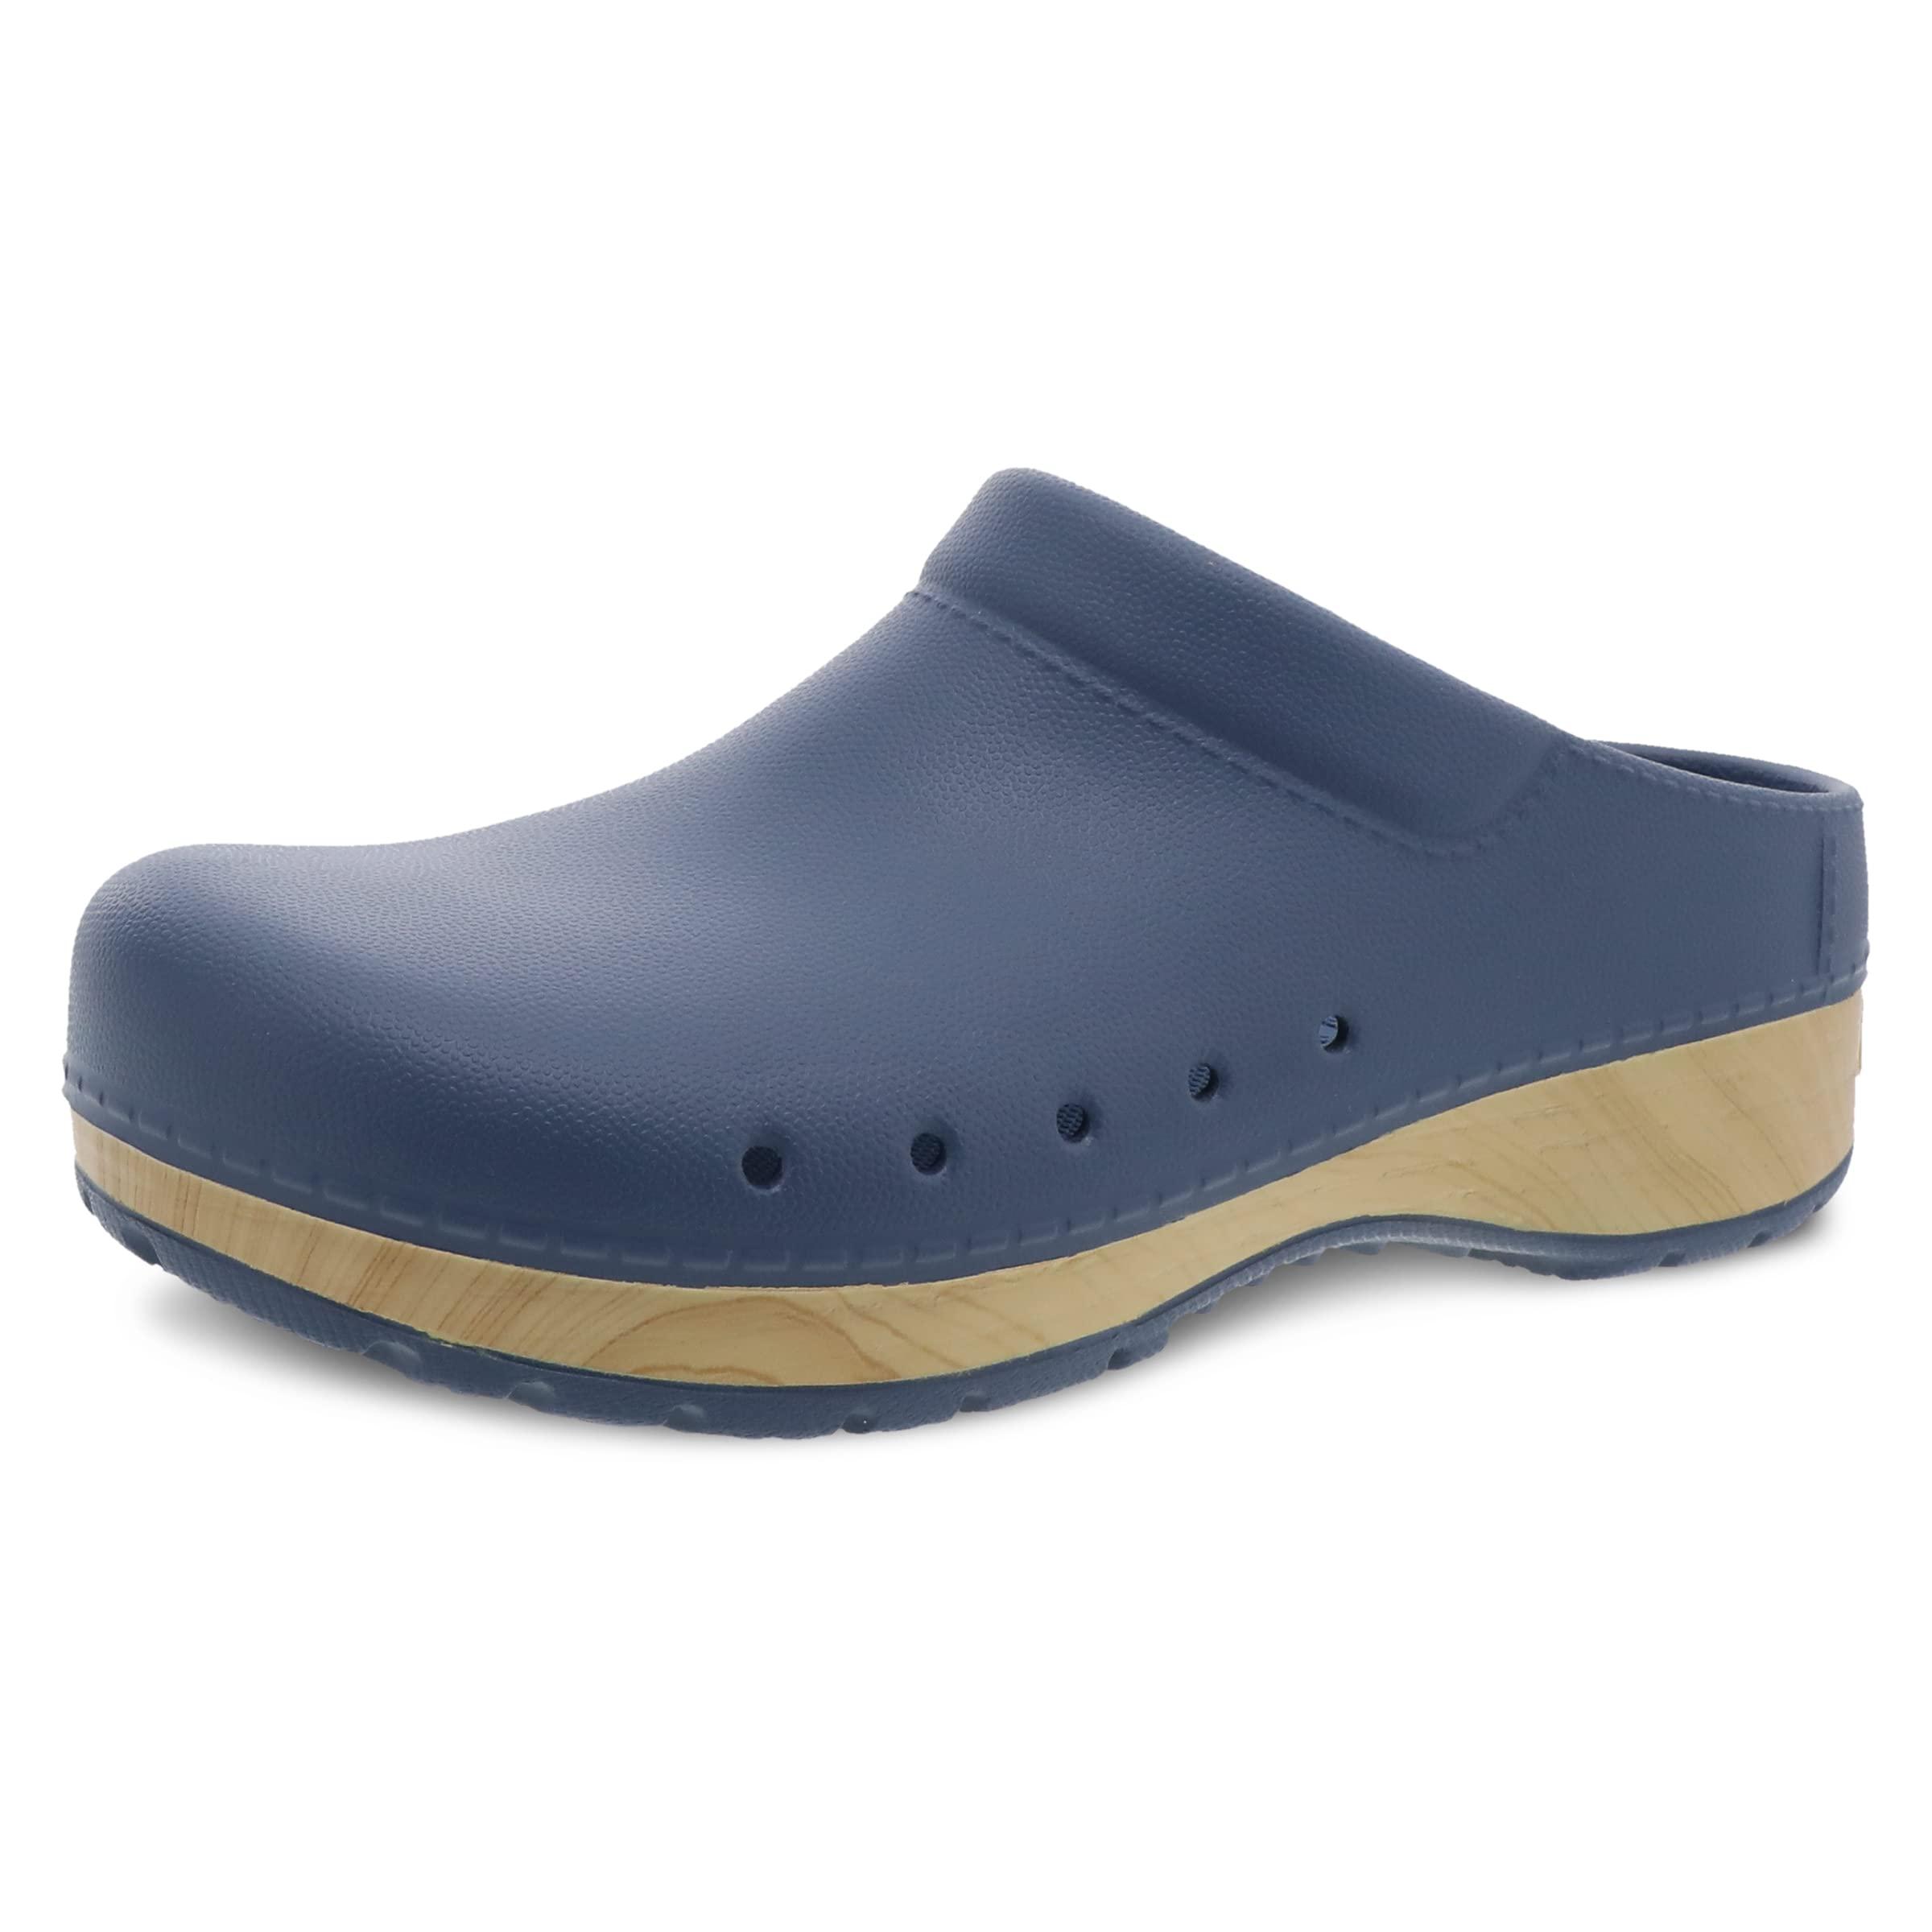 Dansko On Mule Clog For – Lightweight Cushioned Comfort And Removable ...